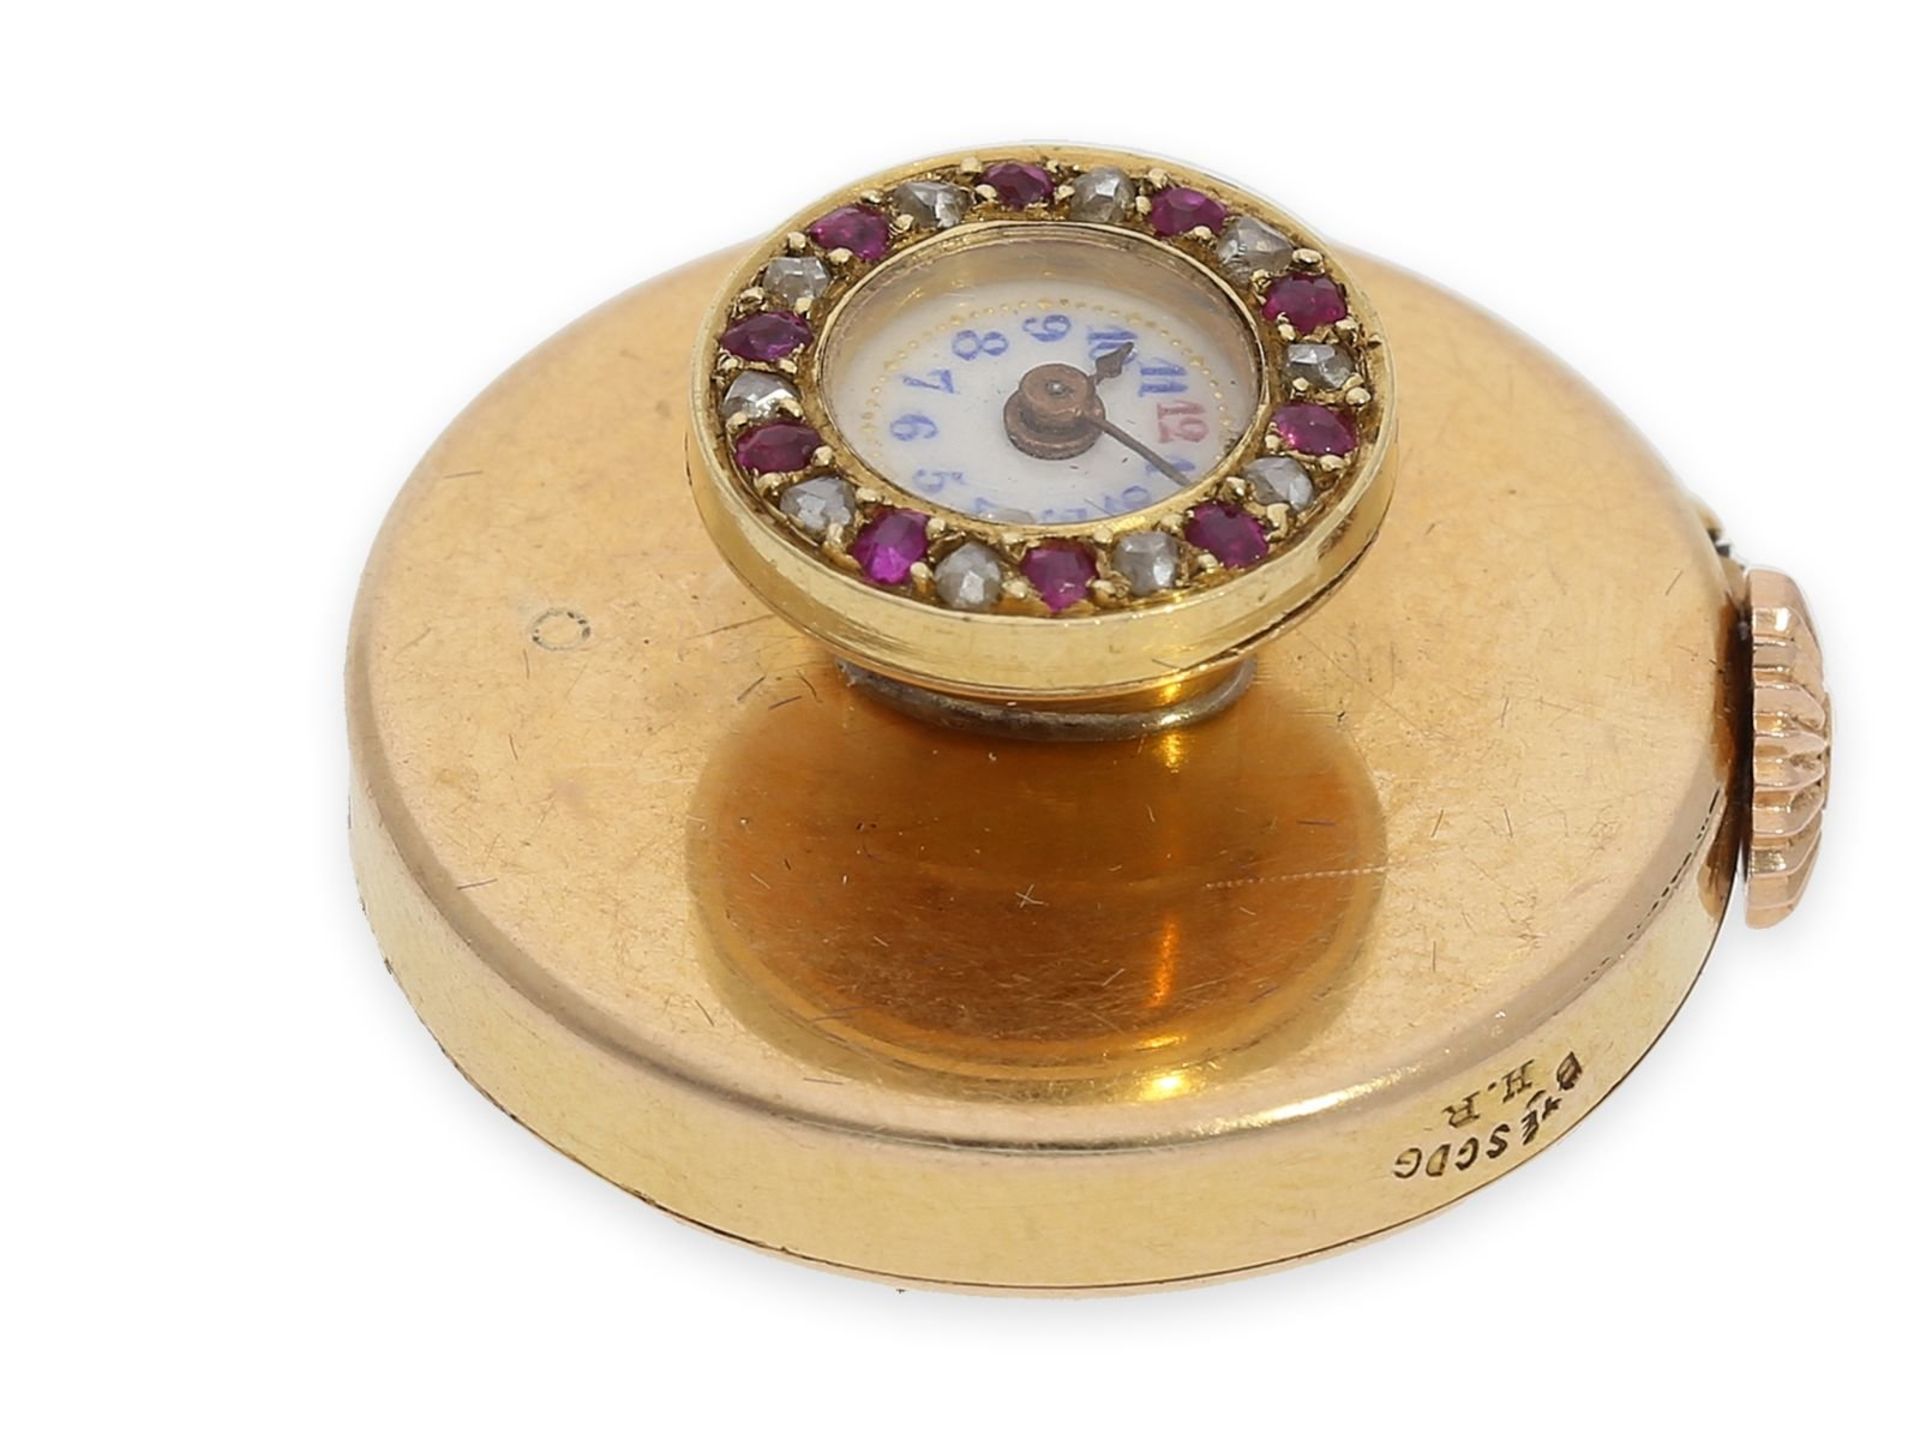 Buttonhole watch: extremely rare buttonhole watch in 18K gold with diamond and ruby setting, punched - Image 2 of 5